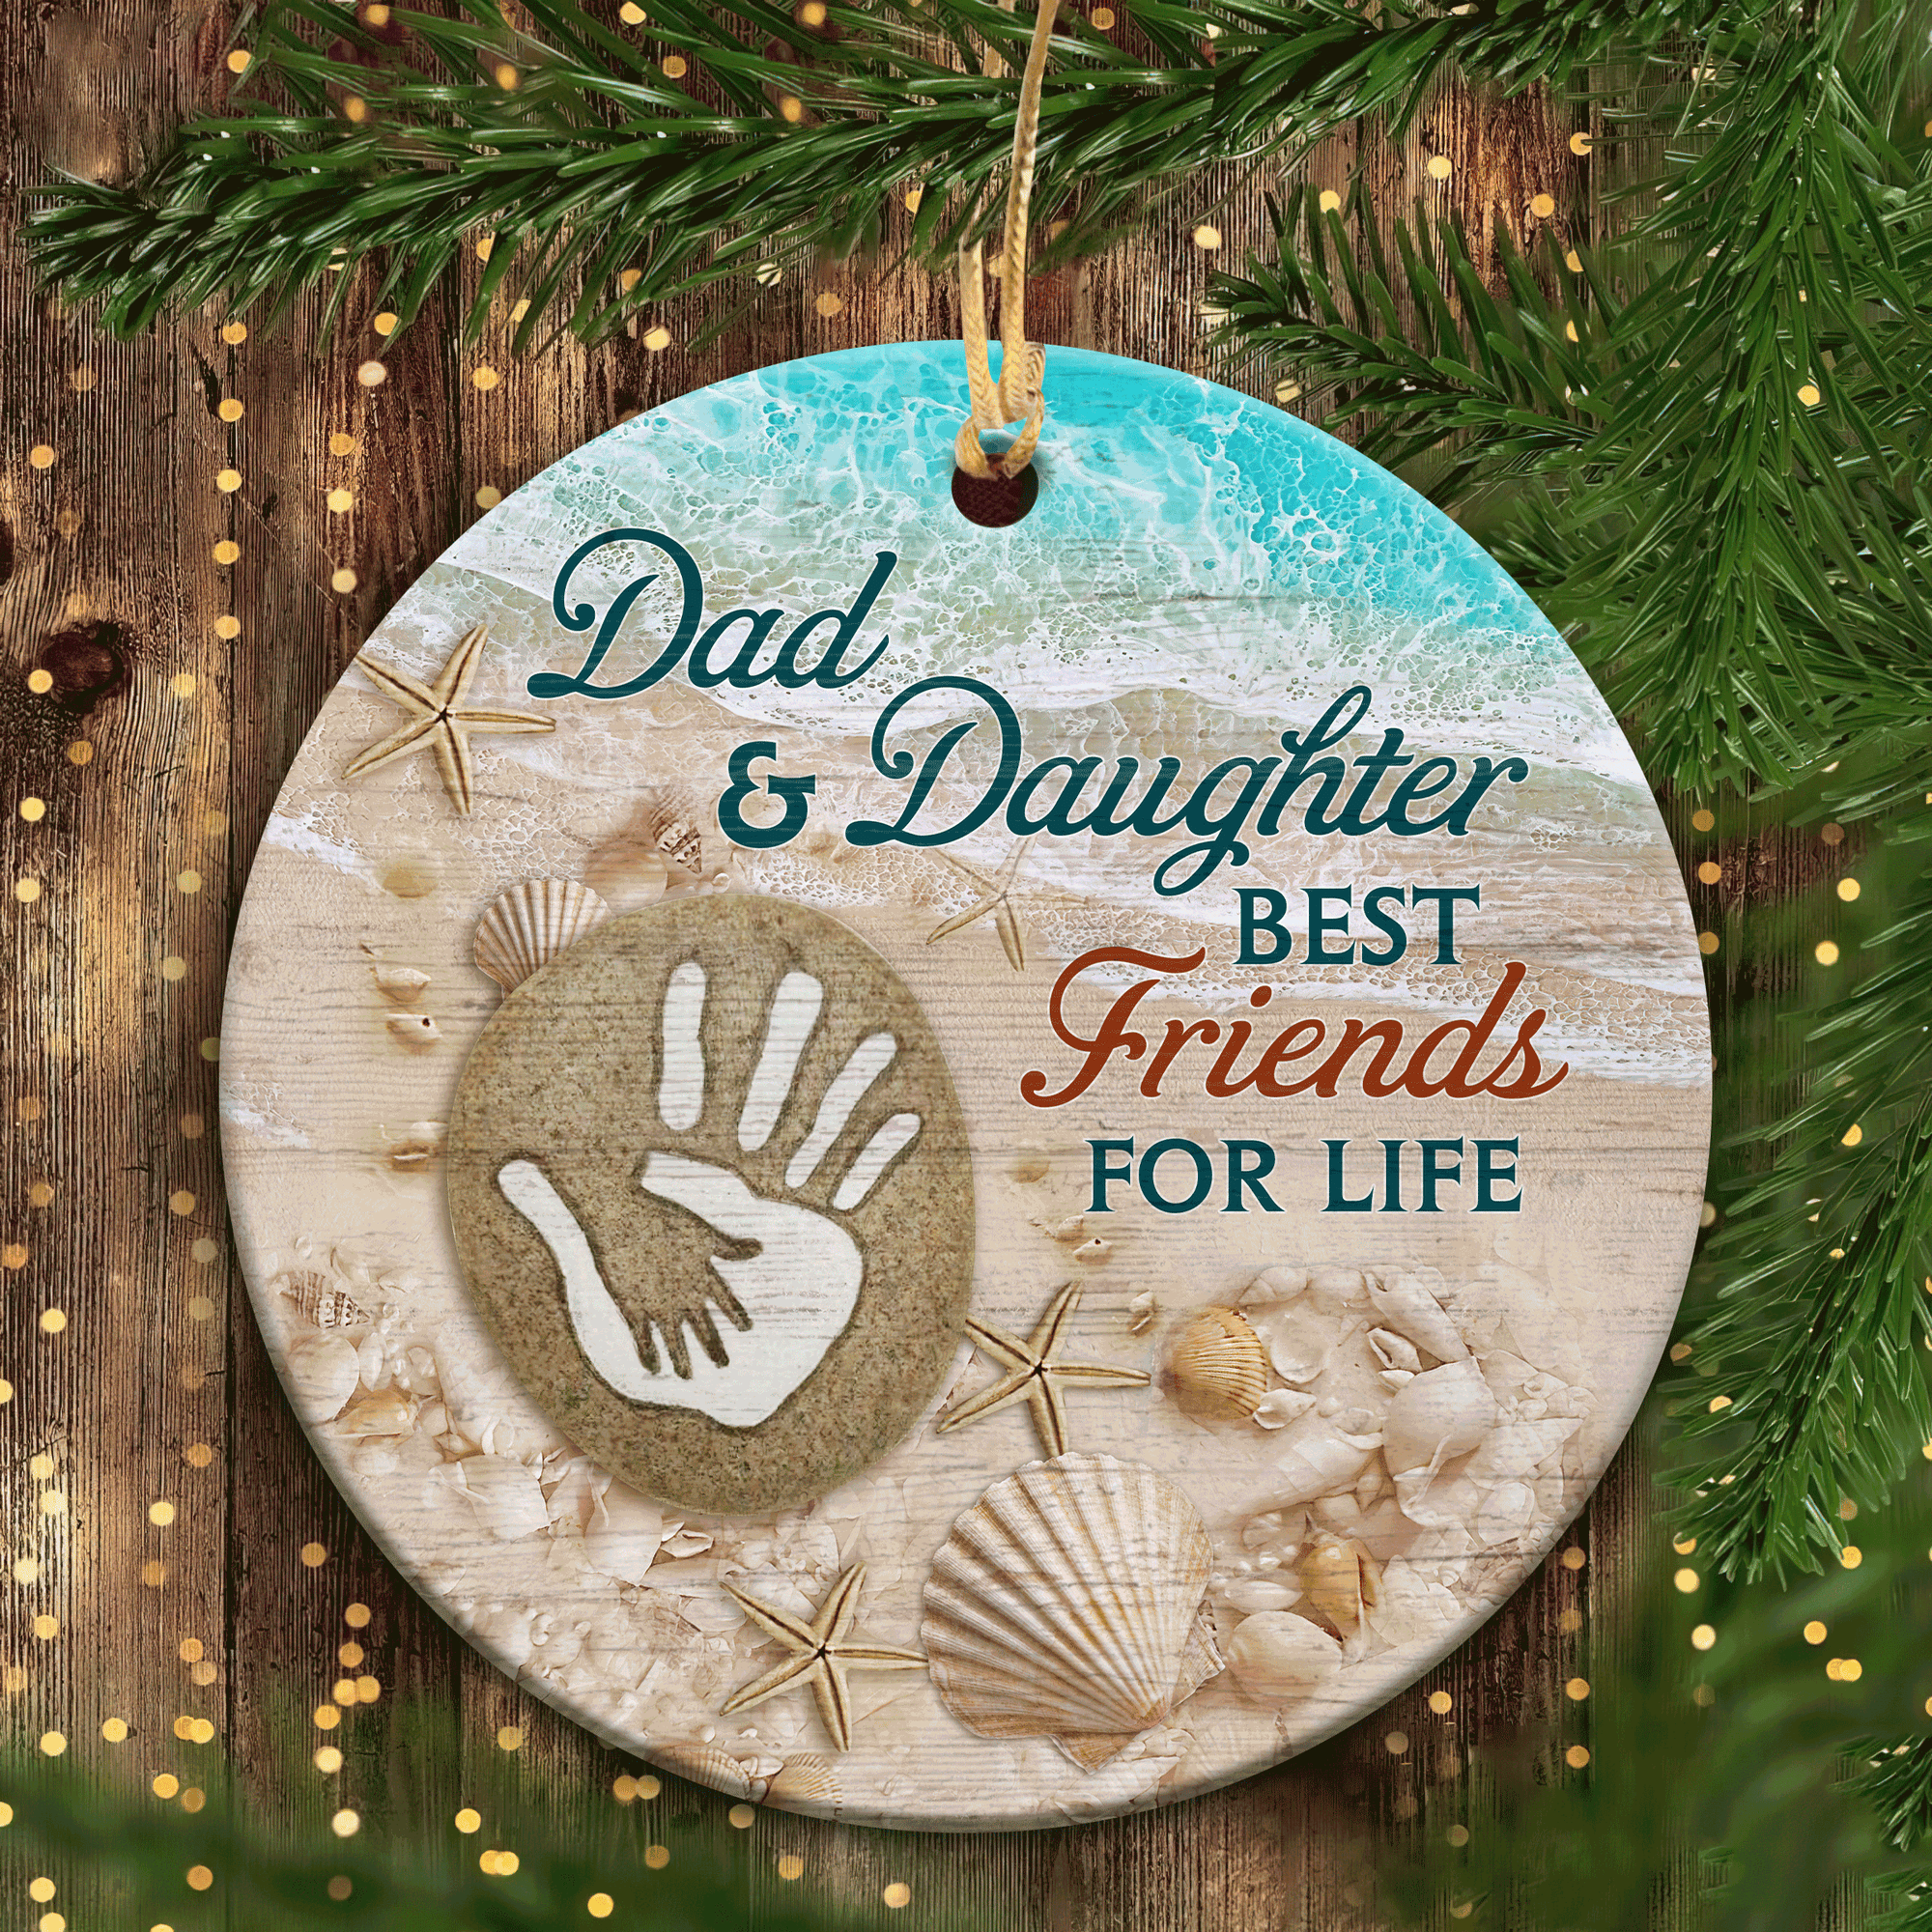 Christmas Gifts For Daughter From Dad, Dad To Daughter Christmas Ceramic Ornament, Family Ornaments, Hand In Hand, Best Friend For Life